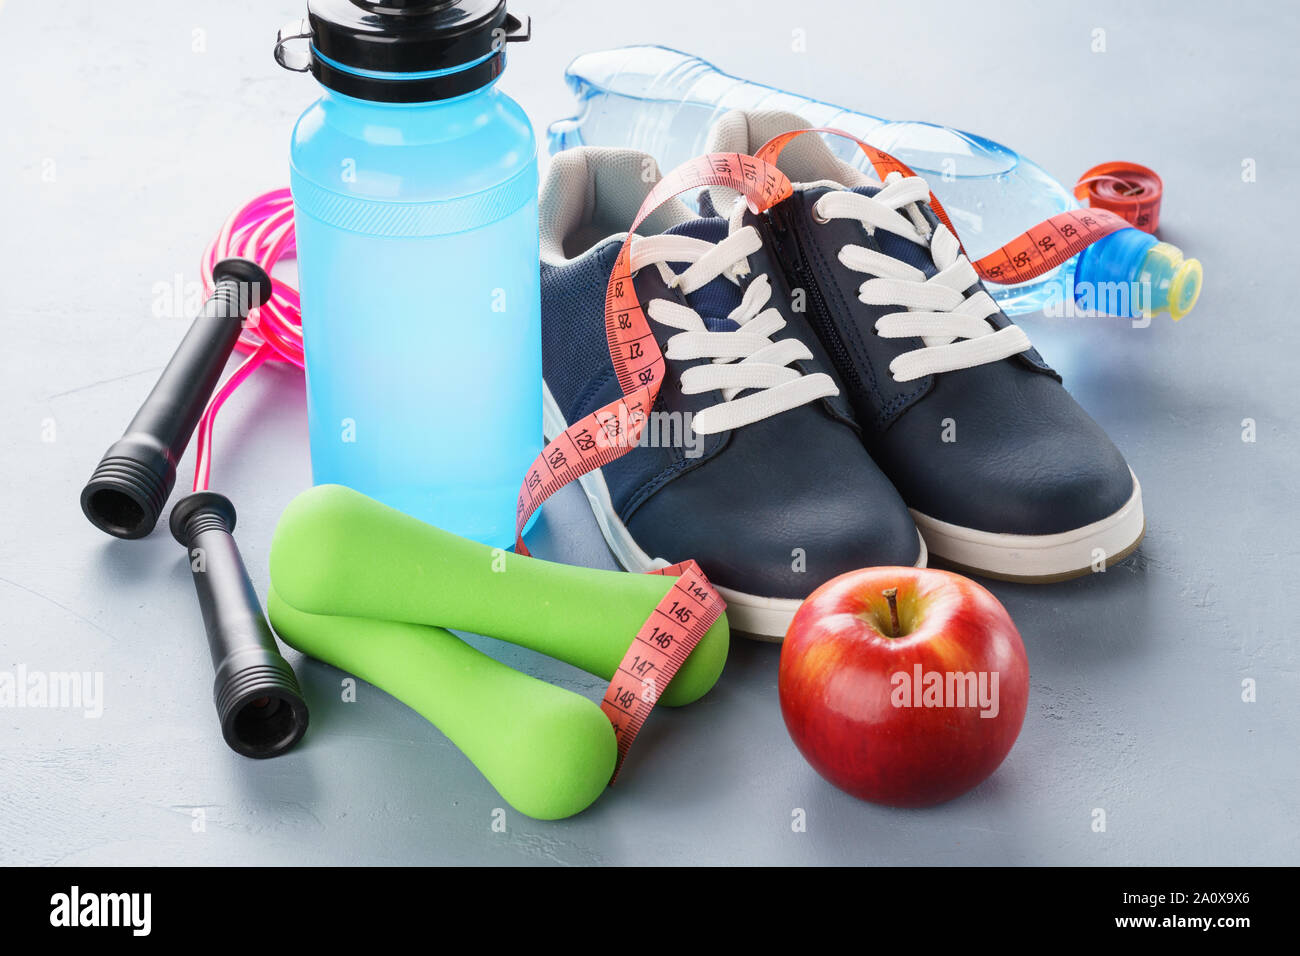 Set of various sporting goods - sneakers, dumbbells, water bottle and  skipping rope. Fitness equipment for gym or home. Healthy lifestyle concept  Stock Photo - Alamy